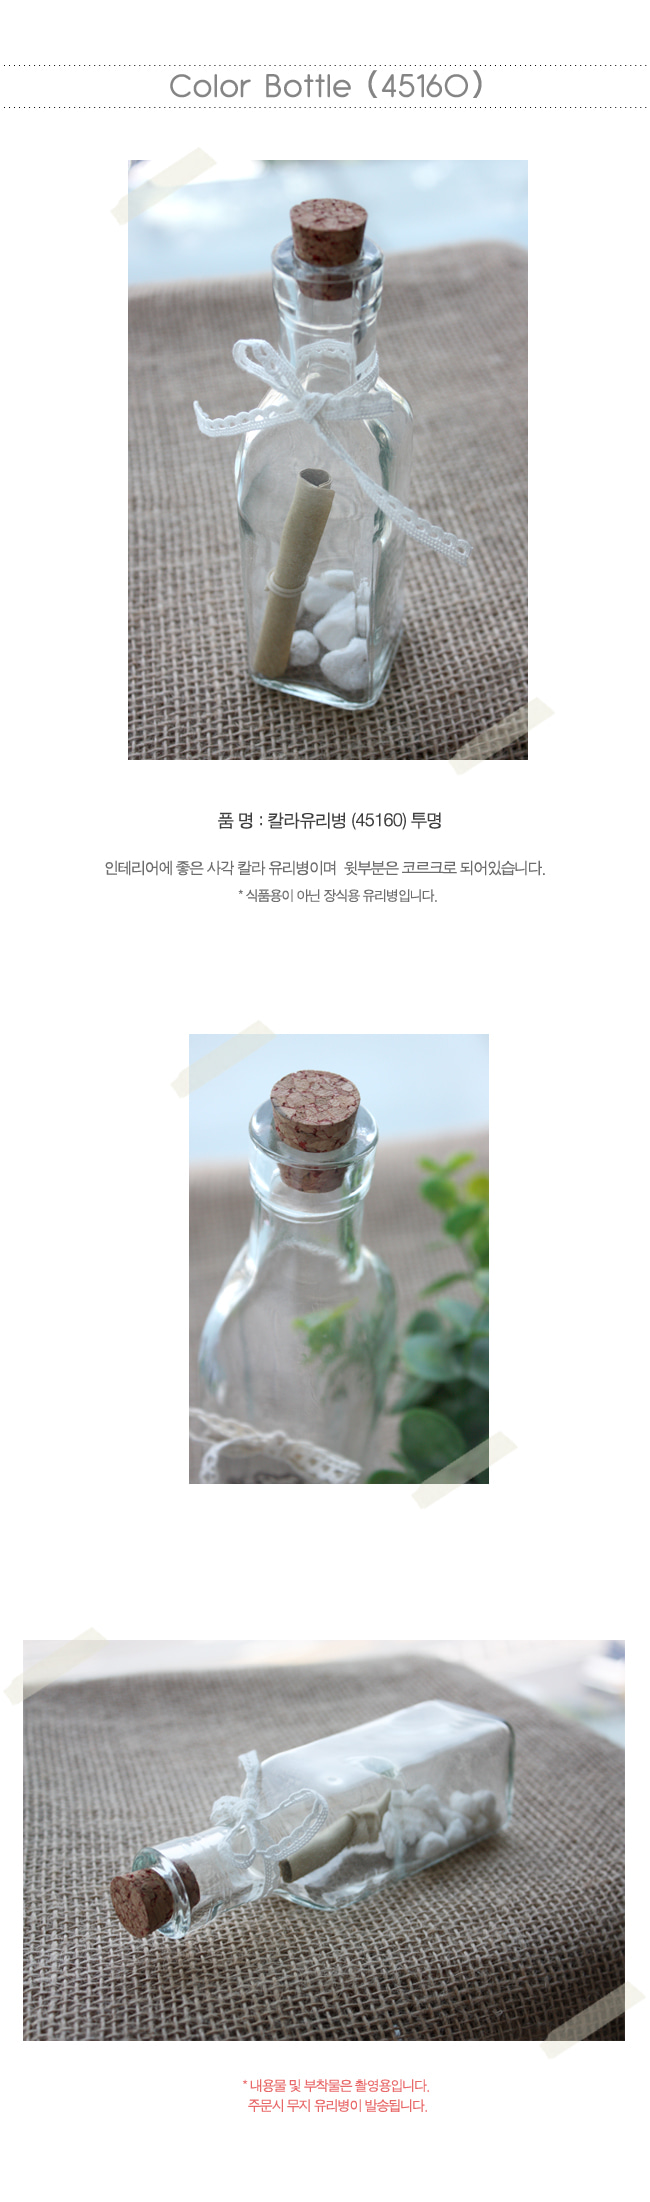 colorBottle45160_Clear.jpg